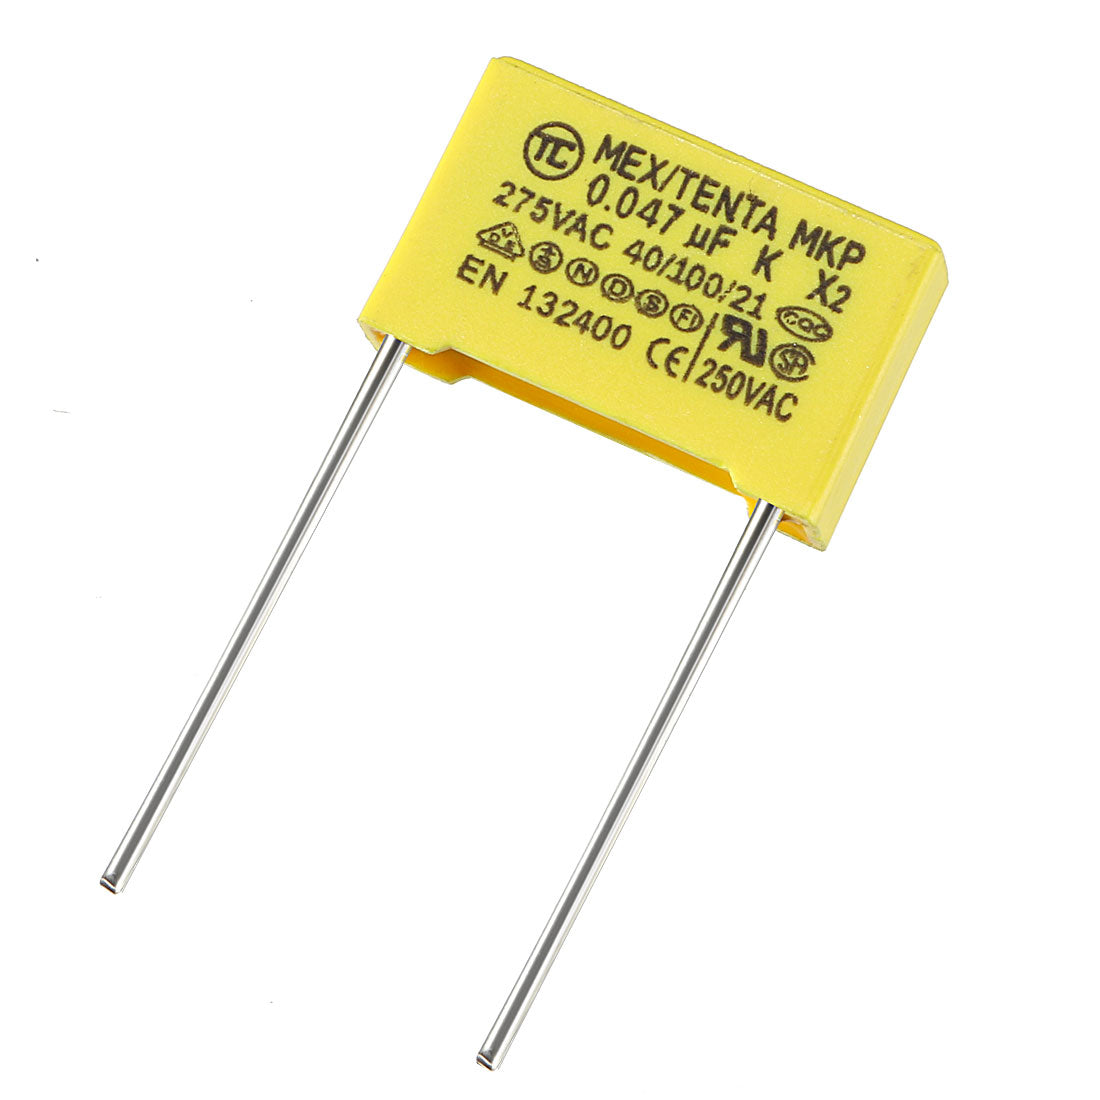 uxcell Uxcell Safety Capacitors Polypropylene Film 0.047uF 275VAC X2 MKP 13.5mm Pin Pitch 5 Pcs